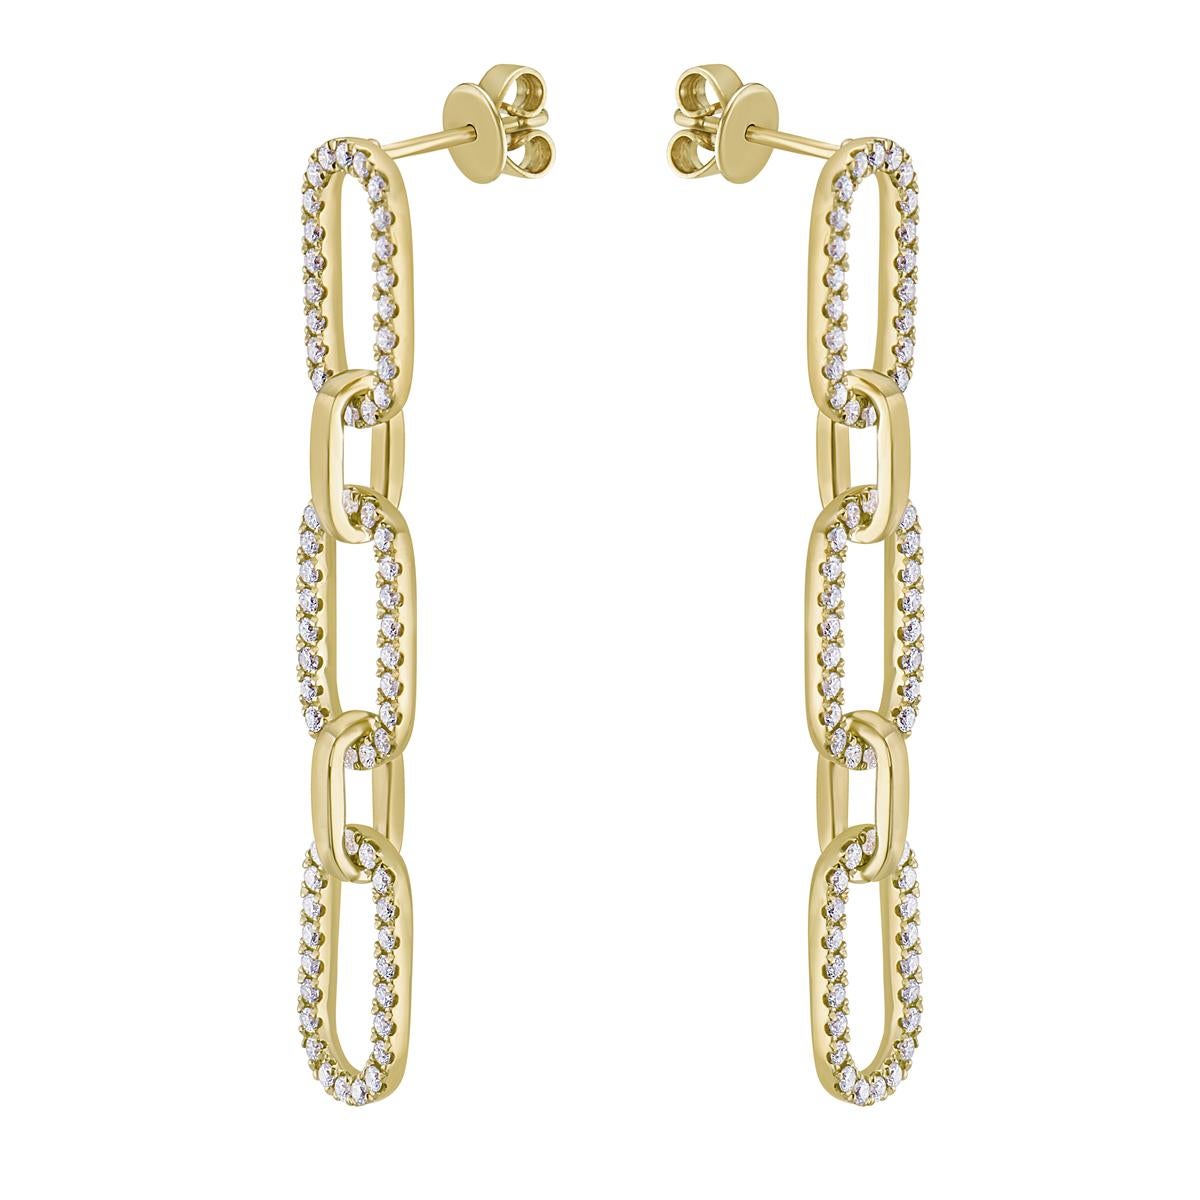 With these exquisite yellow-gold paperclip link drop earrings, style and glamour are in the spotlight. These 14-carat earrings are made from 4.3 grams of gold. These earrings are adorned with SI-SI2, GH color diamonds, made out of 132 diamonds